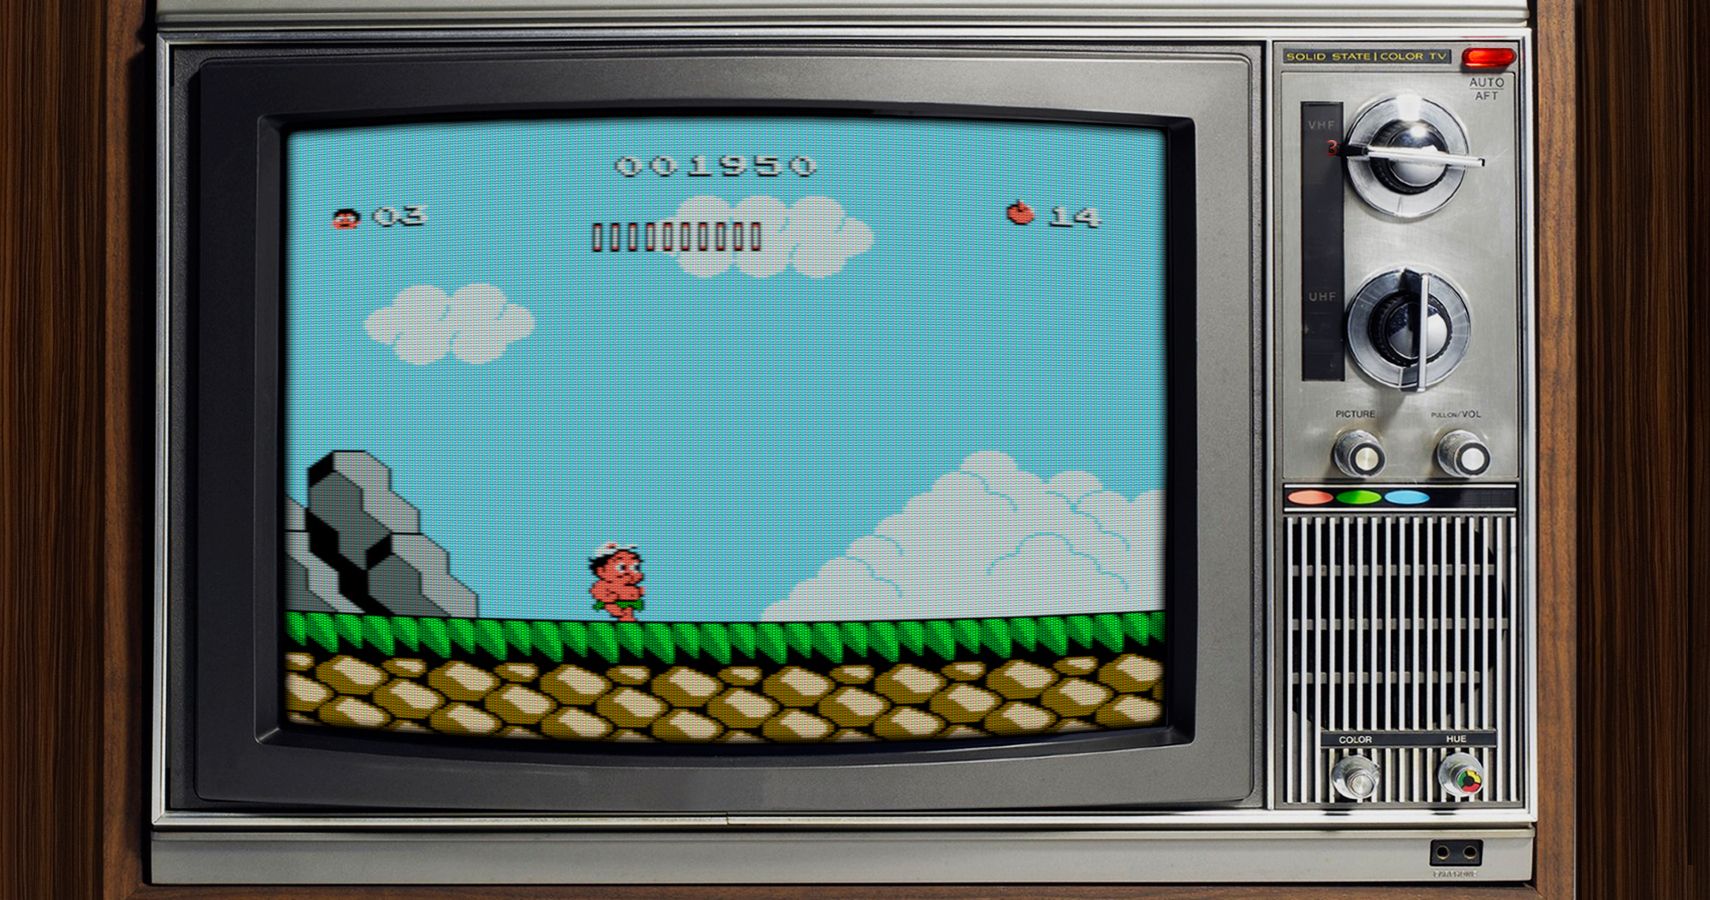 CRT TVs Are Making A Comeback And Its Thanks To Retro Gaming